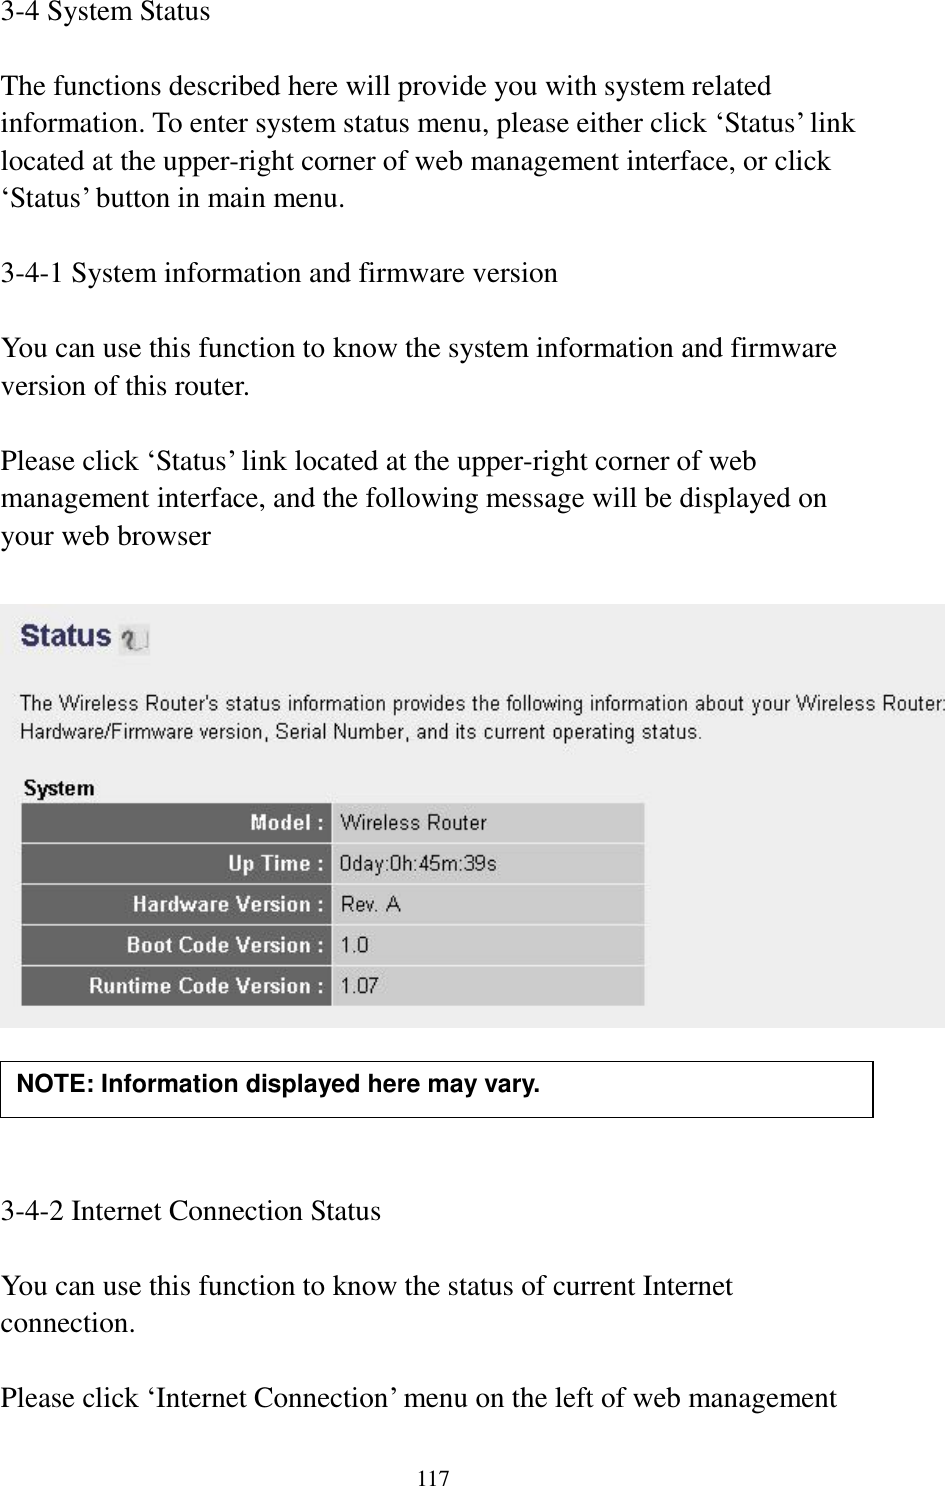 117 3-4 System Status  The functions described here will provide you with system related information. To enter system status menu, please either click „Status‟ link located at the upper-right corner of web management interface, or click „Status‟ button in main menu.  3-4-1 System information and firmware version  You can use this function to know the system information and firmware version of this router.  Please click „Status‟ link located at the upper-right corner of web management interface, and the following message will be displayed on your web browser       3-4-2 Internet Connection Status  You can use this function to know the status of current Internet connection.  Please click „Internet Connection‟ menu on the left of web management NOTE: Information displayed here may vary. 